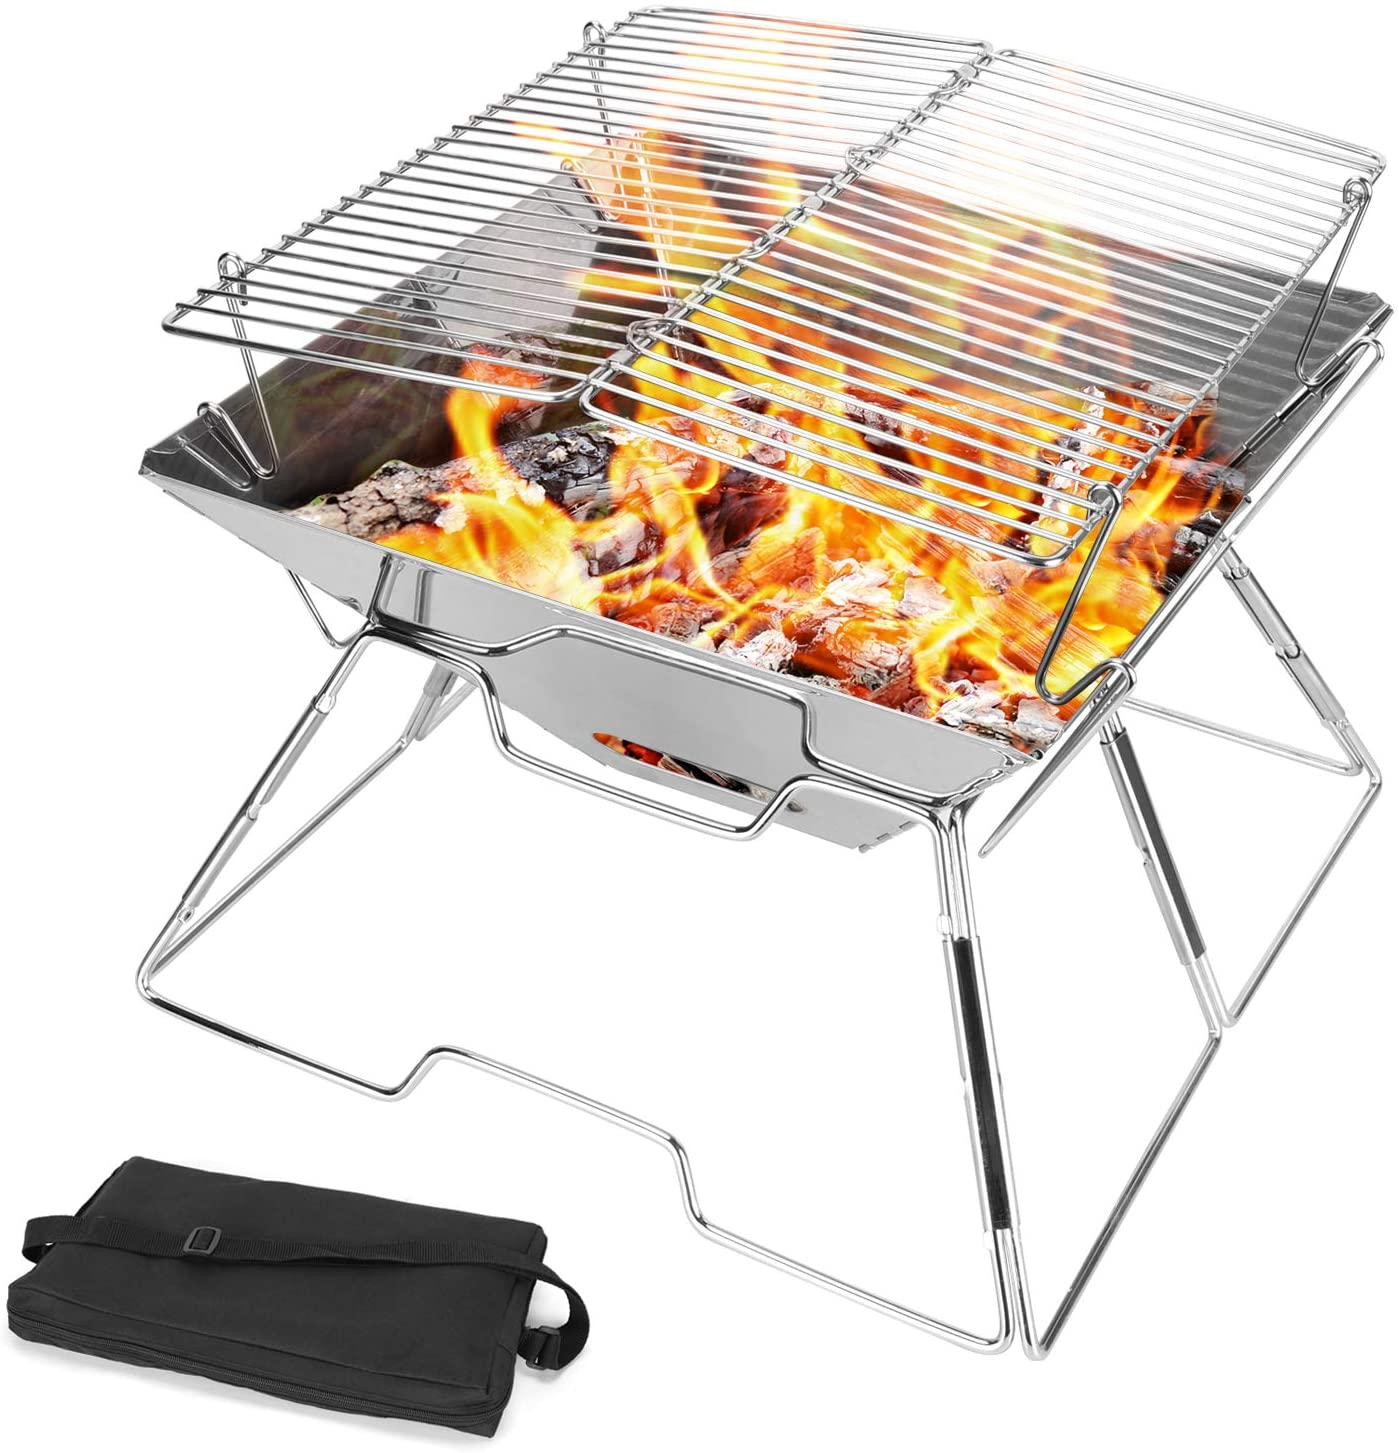 Camp Griddle 10x13 Inches, Campfire Cooking | Boundary Waters Catalog